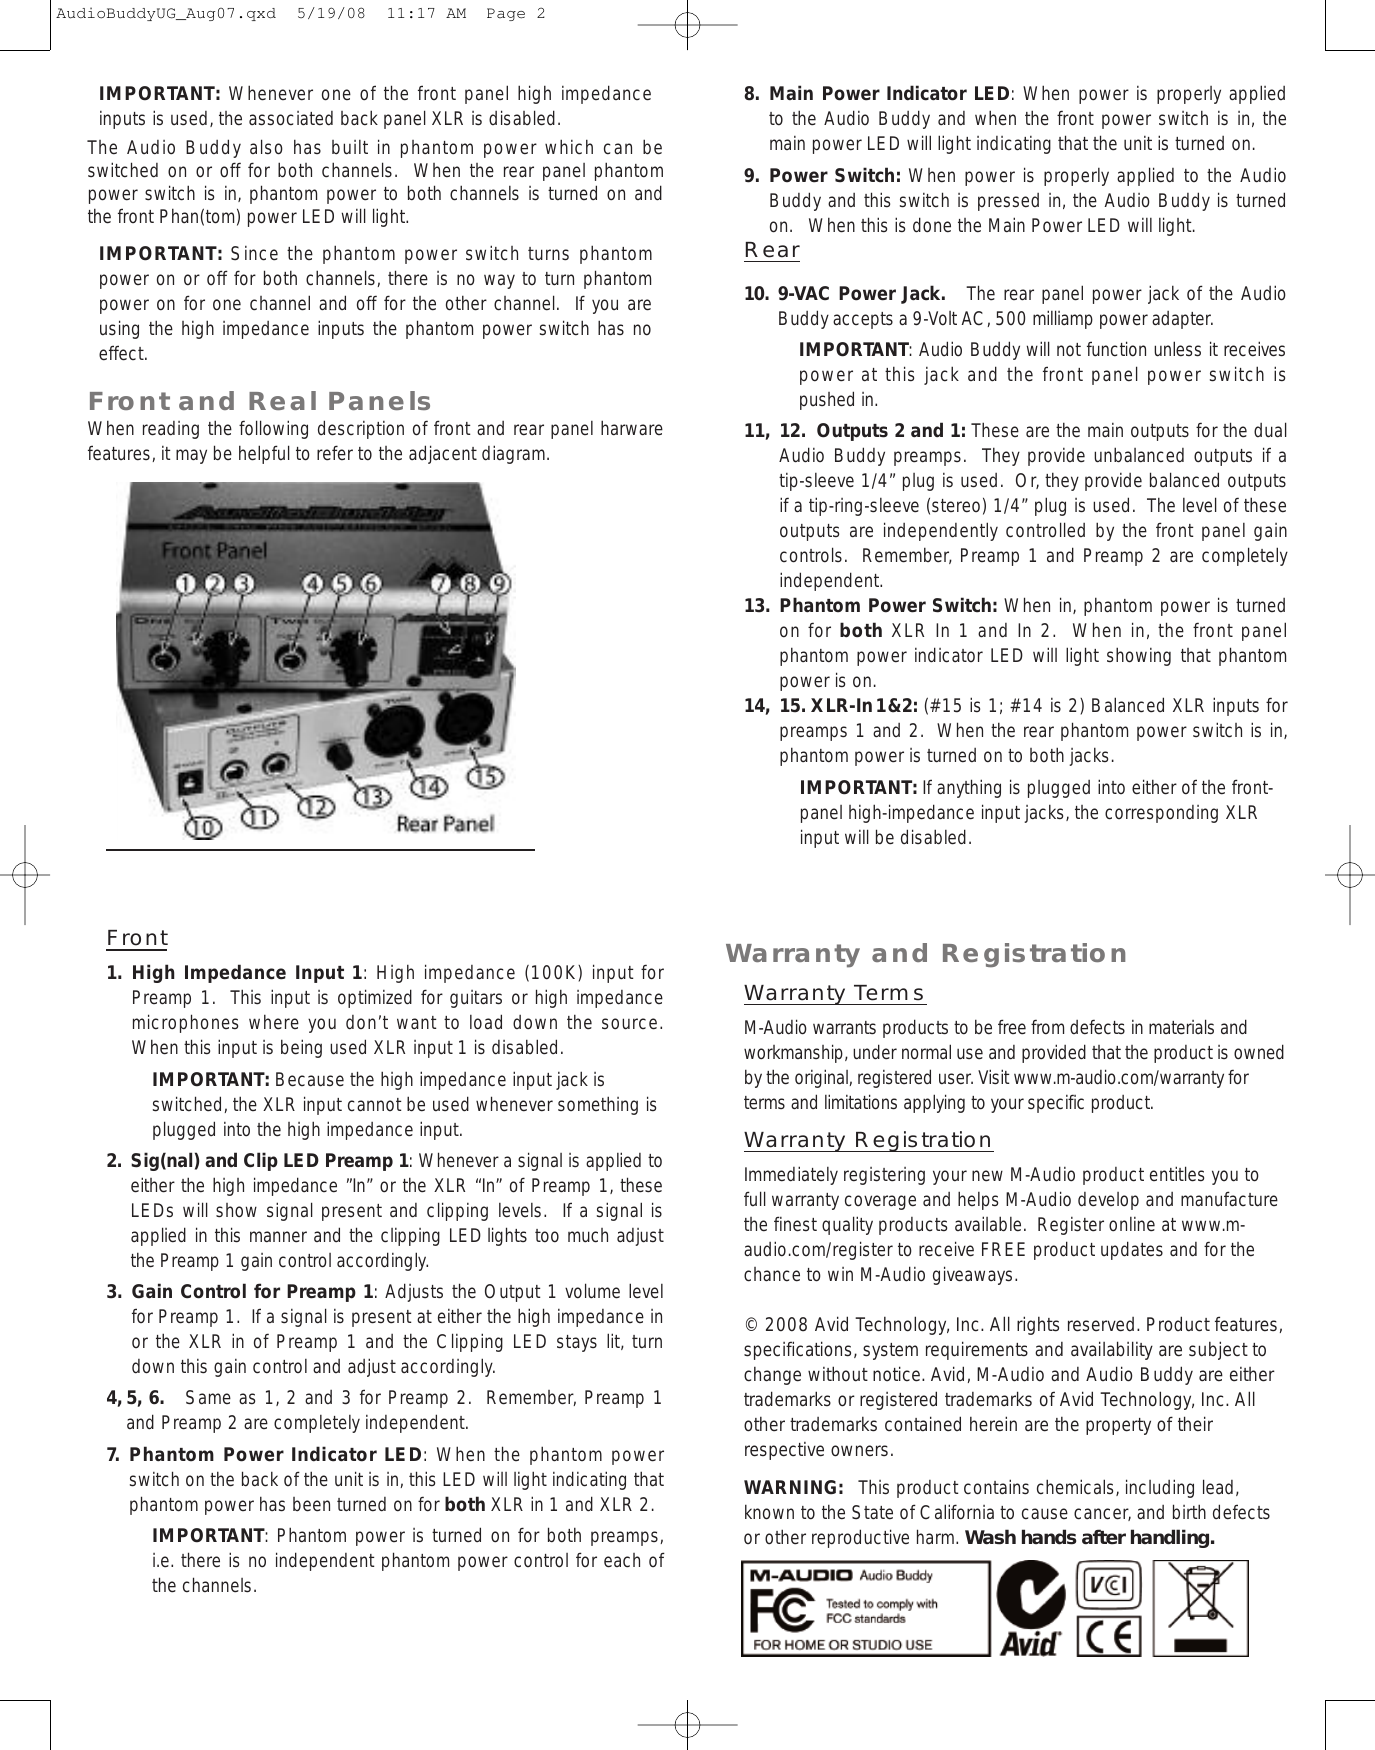 Page 3 of 8 - M-Audio M-Audio-Audio-Buddy-Dual-Mic-Preamp-Users-Manual- Audio Buddy User Guide  M-audio-audio-buddy-dual-mic-preamp-users-manual